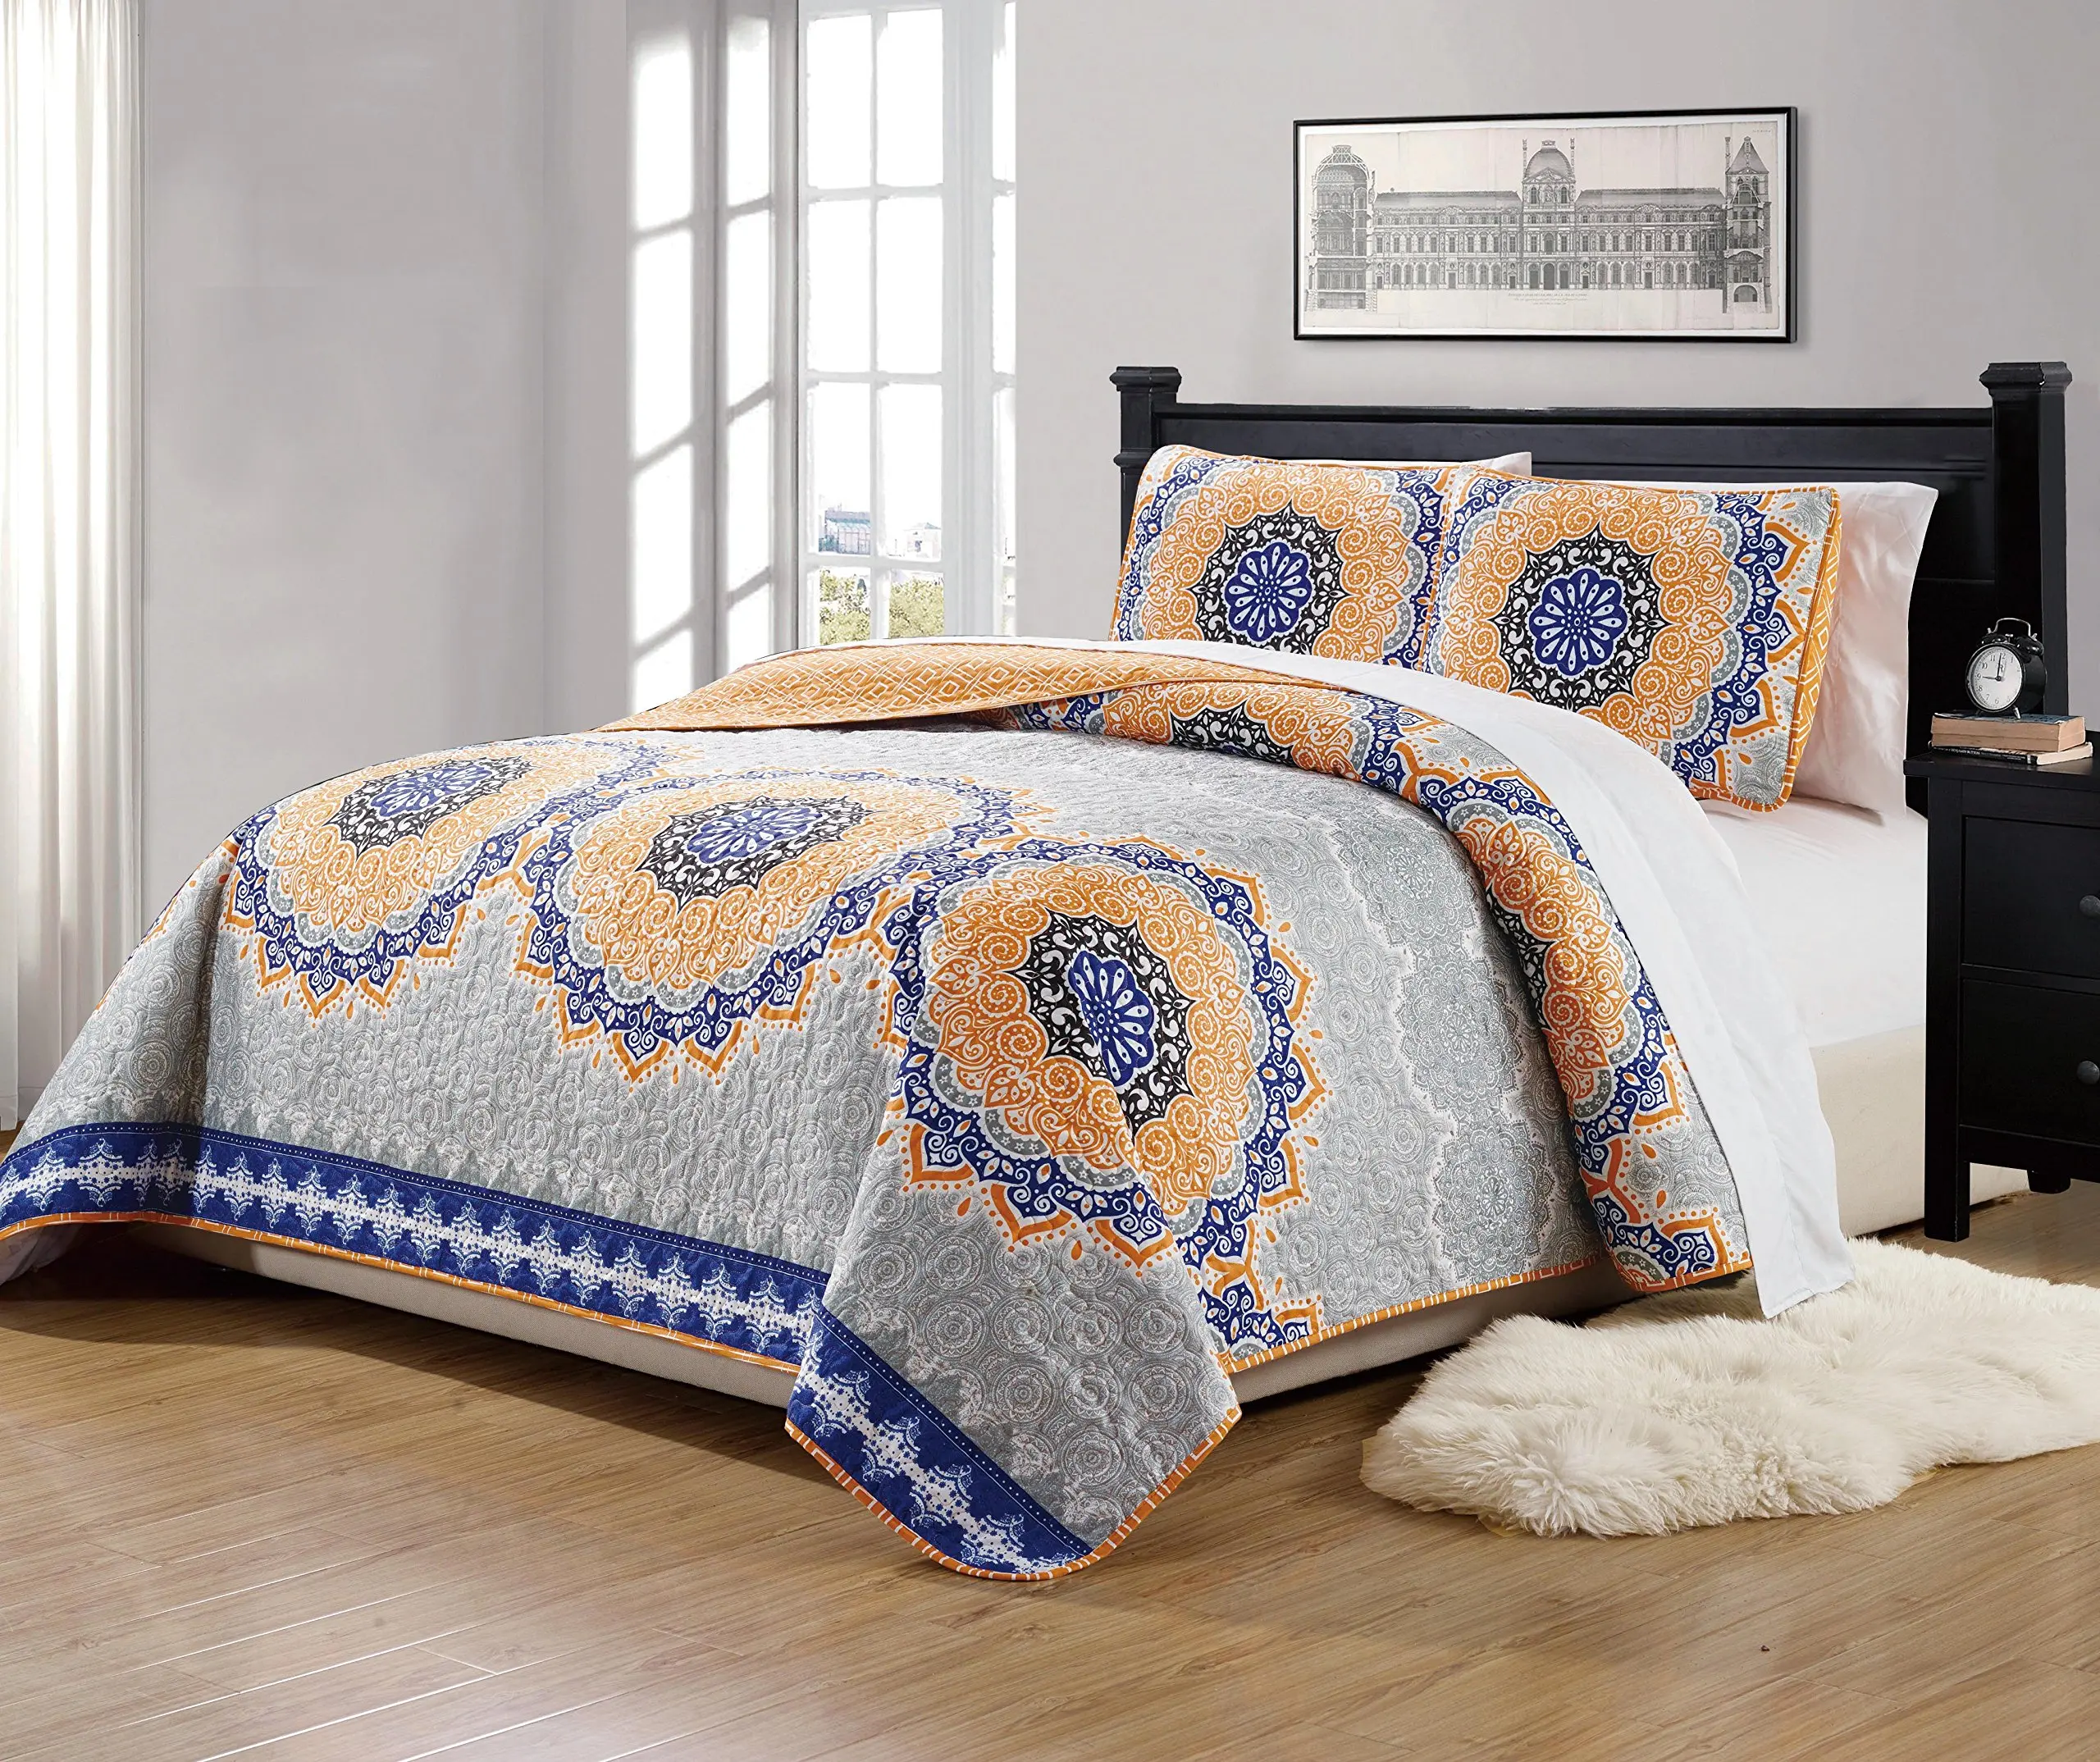 Mk Home 3pc King//California King Oversized Quilted Bedspread Coverlet Set Floral Pattern White Grey Blue New